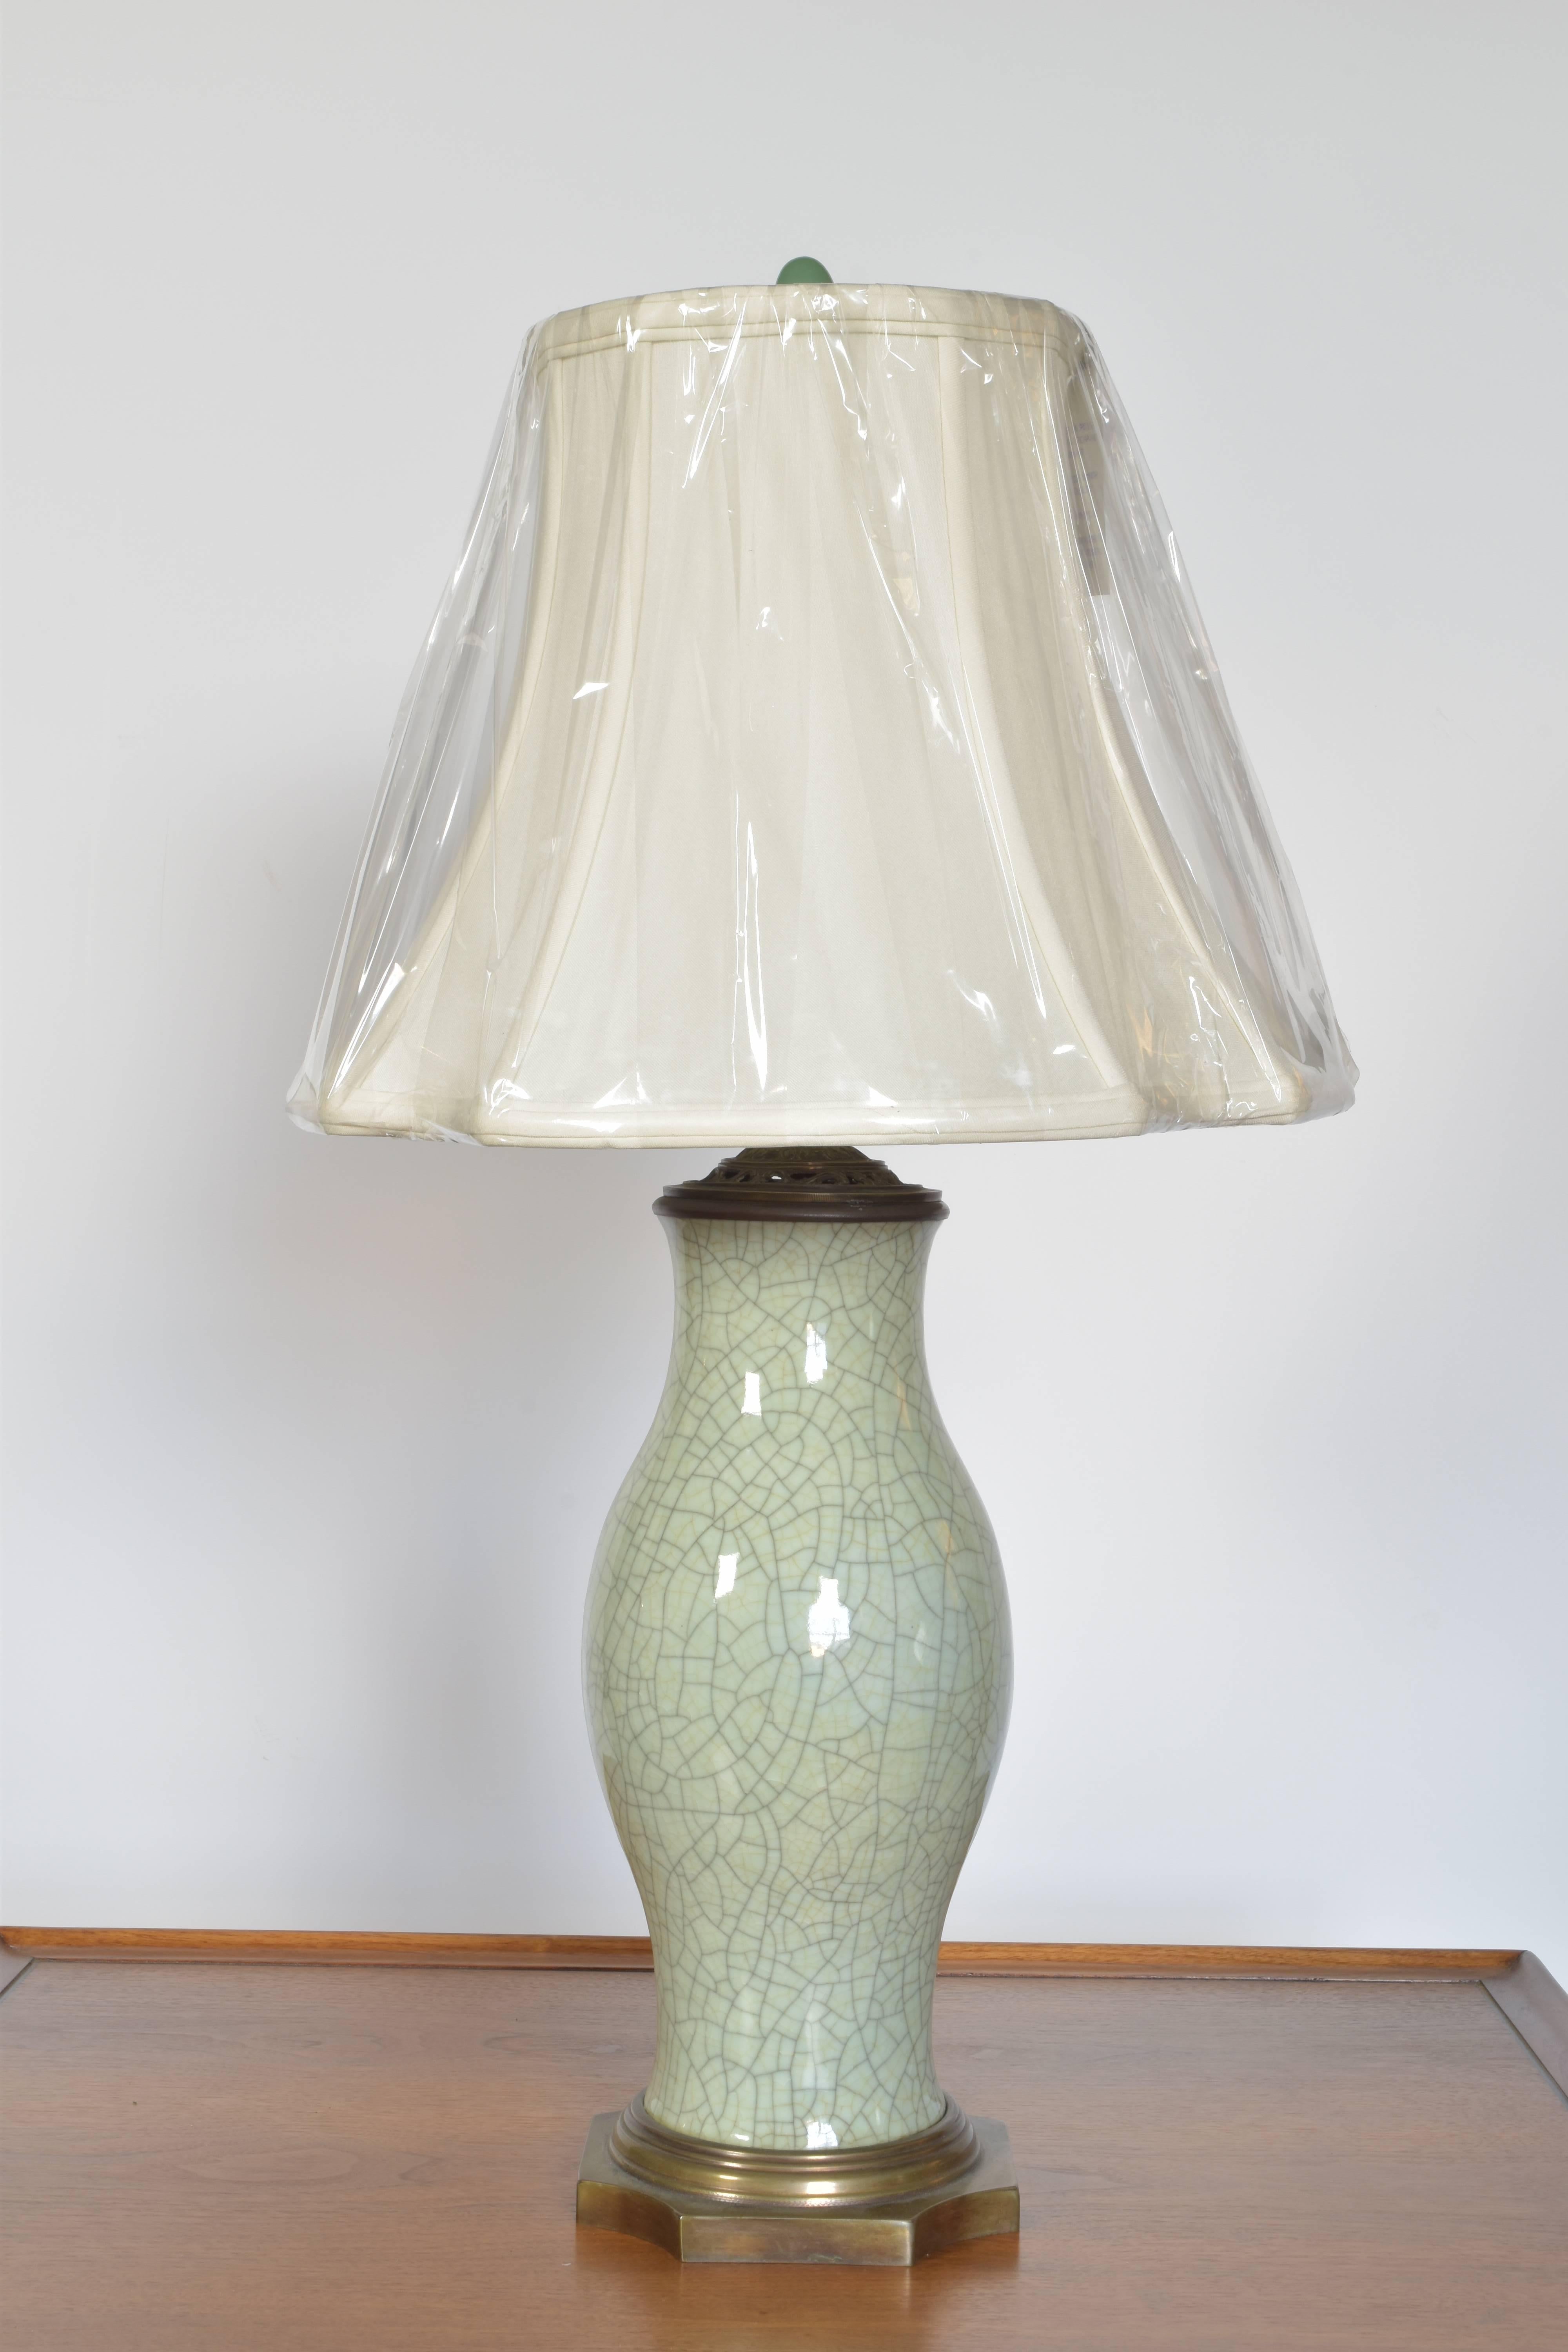 Lovely celadon lamp with cradle glaze on a bronze base with a silk shade and jade finial. Lamp measures 28